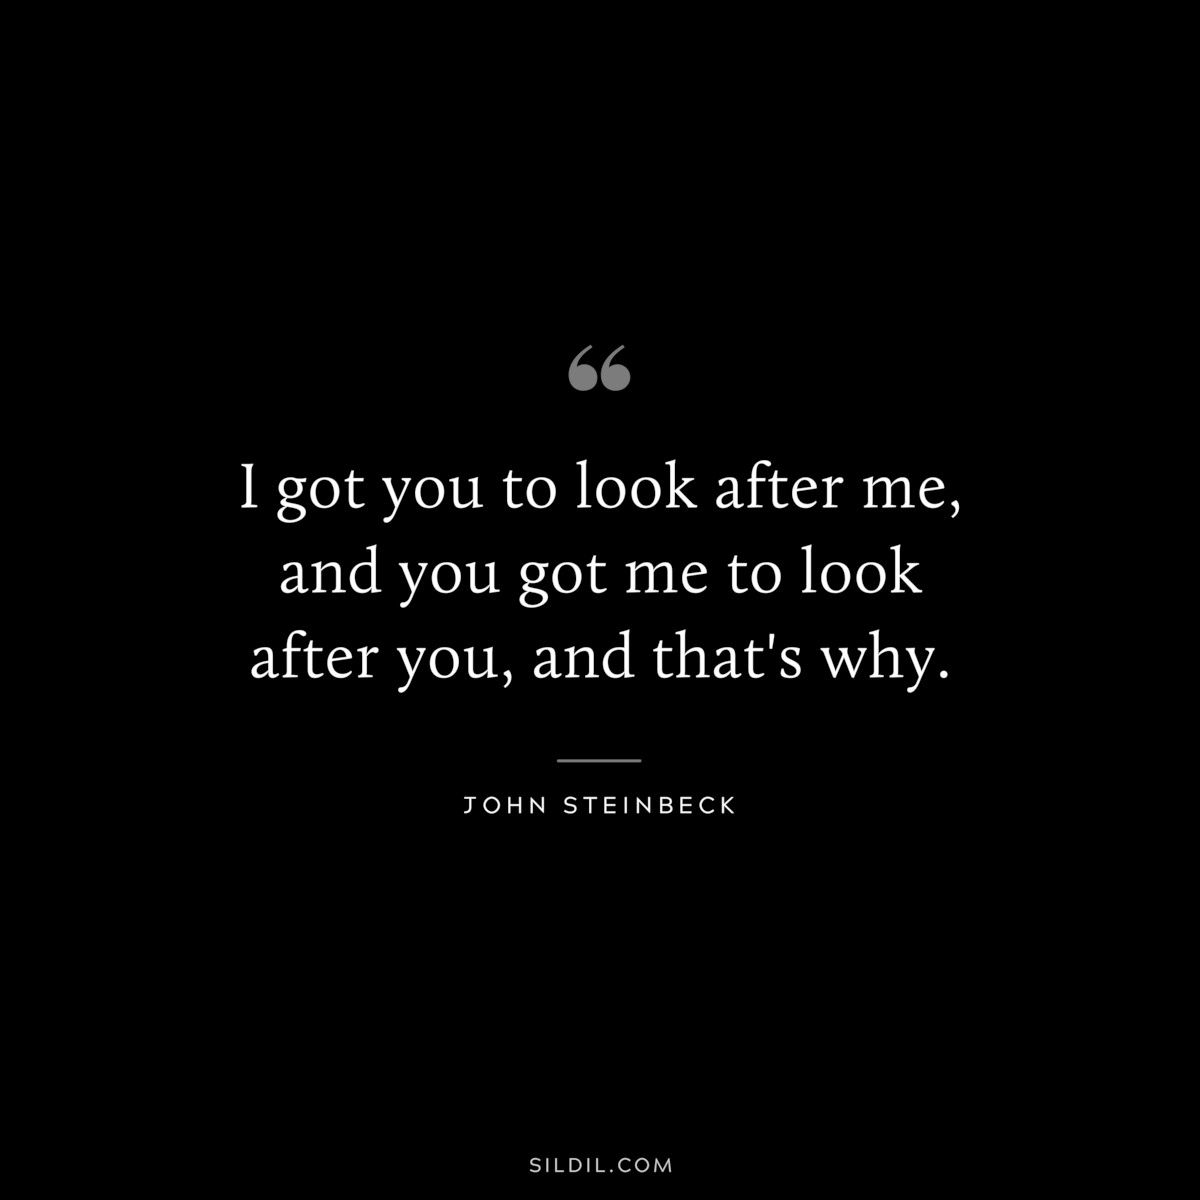 I got you to look after me, and you got me to look after you, and that's why.― John Steinbeck